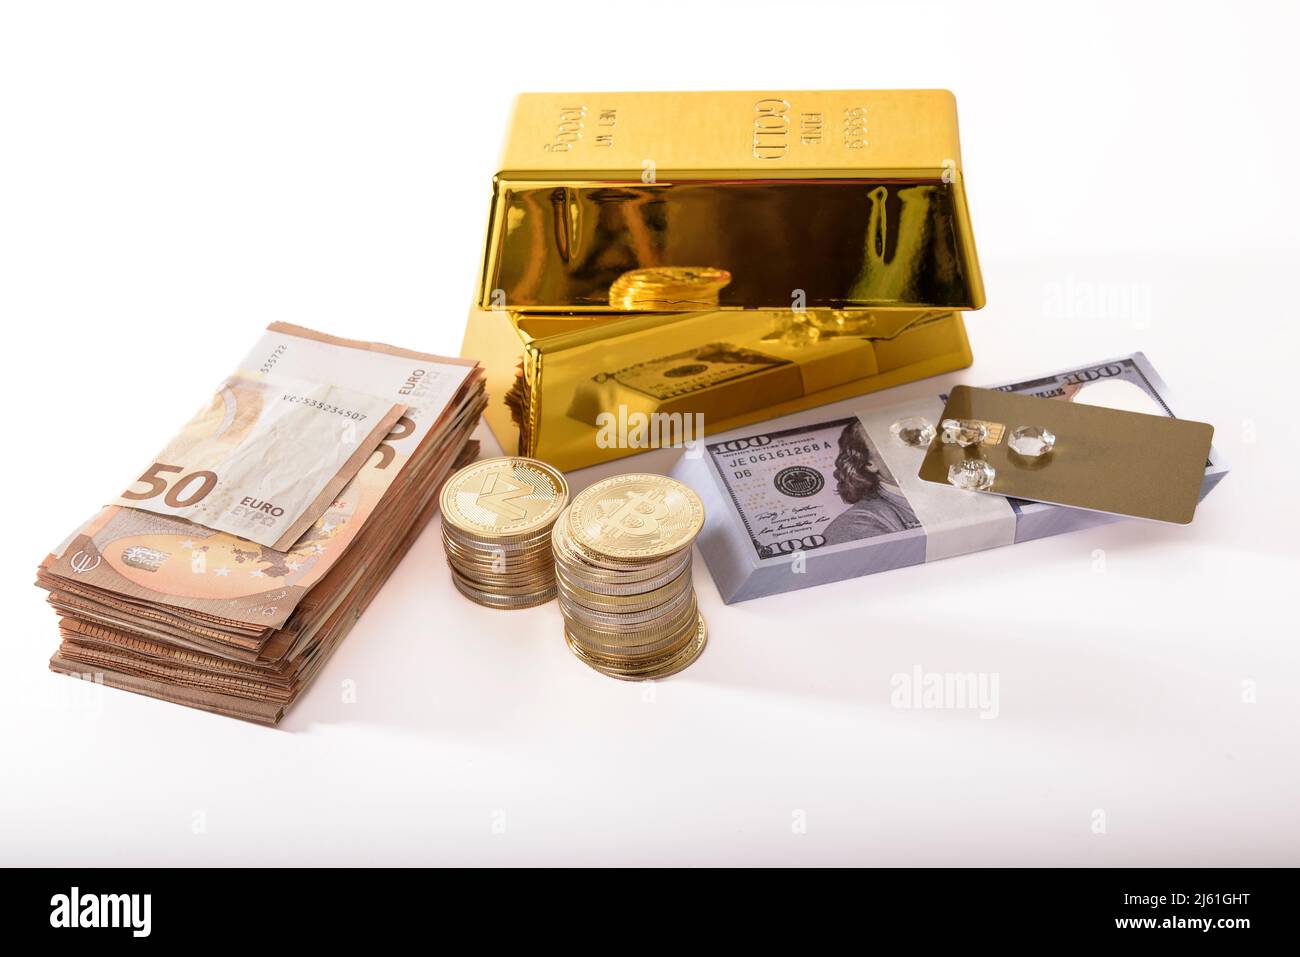 Concept of abundance of material wealth, gold, foreign exchange, diamonds. Stock Photo